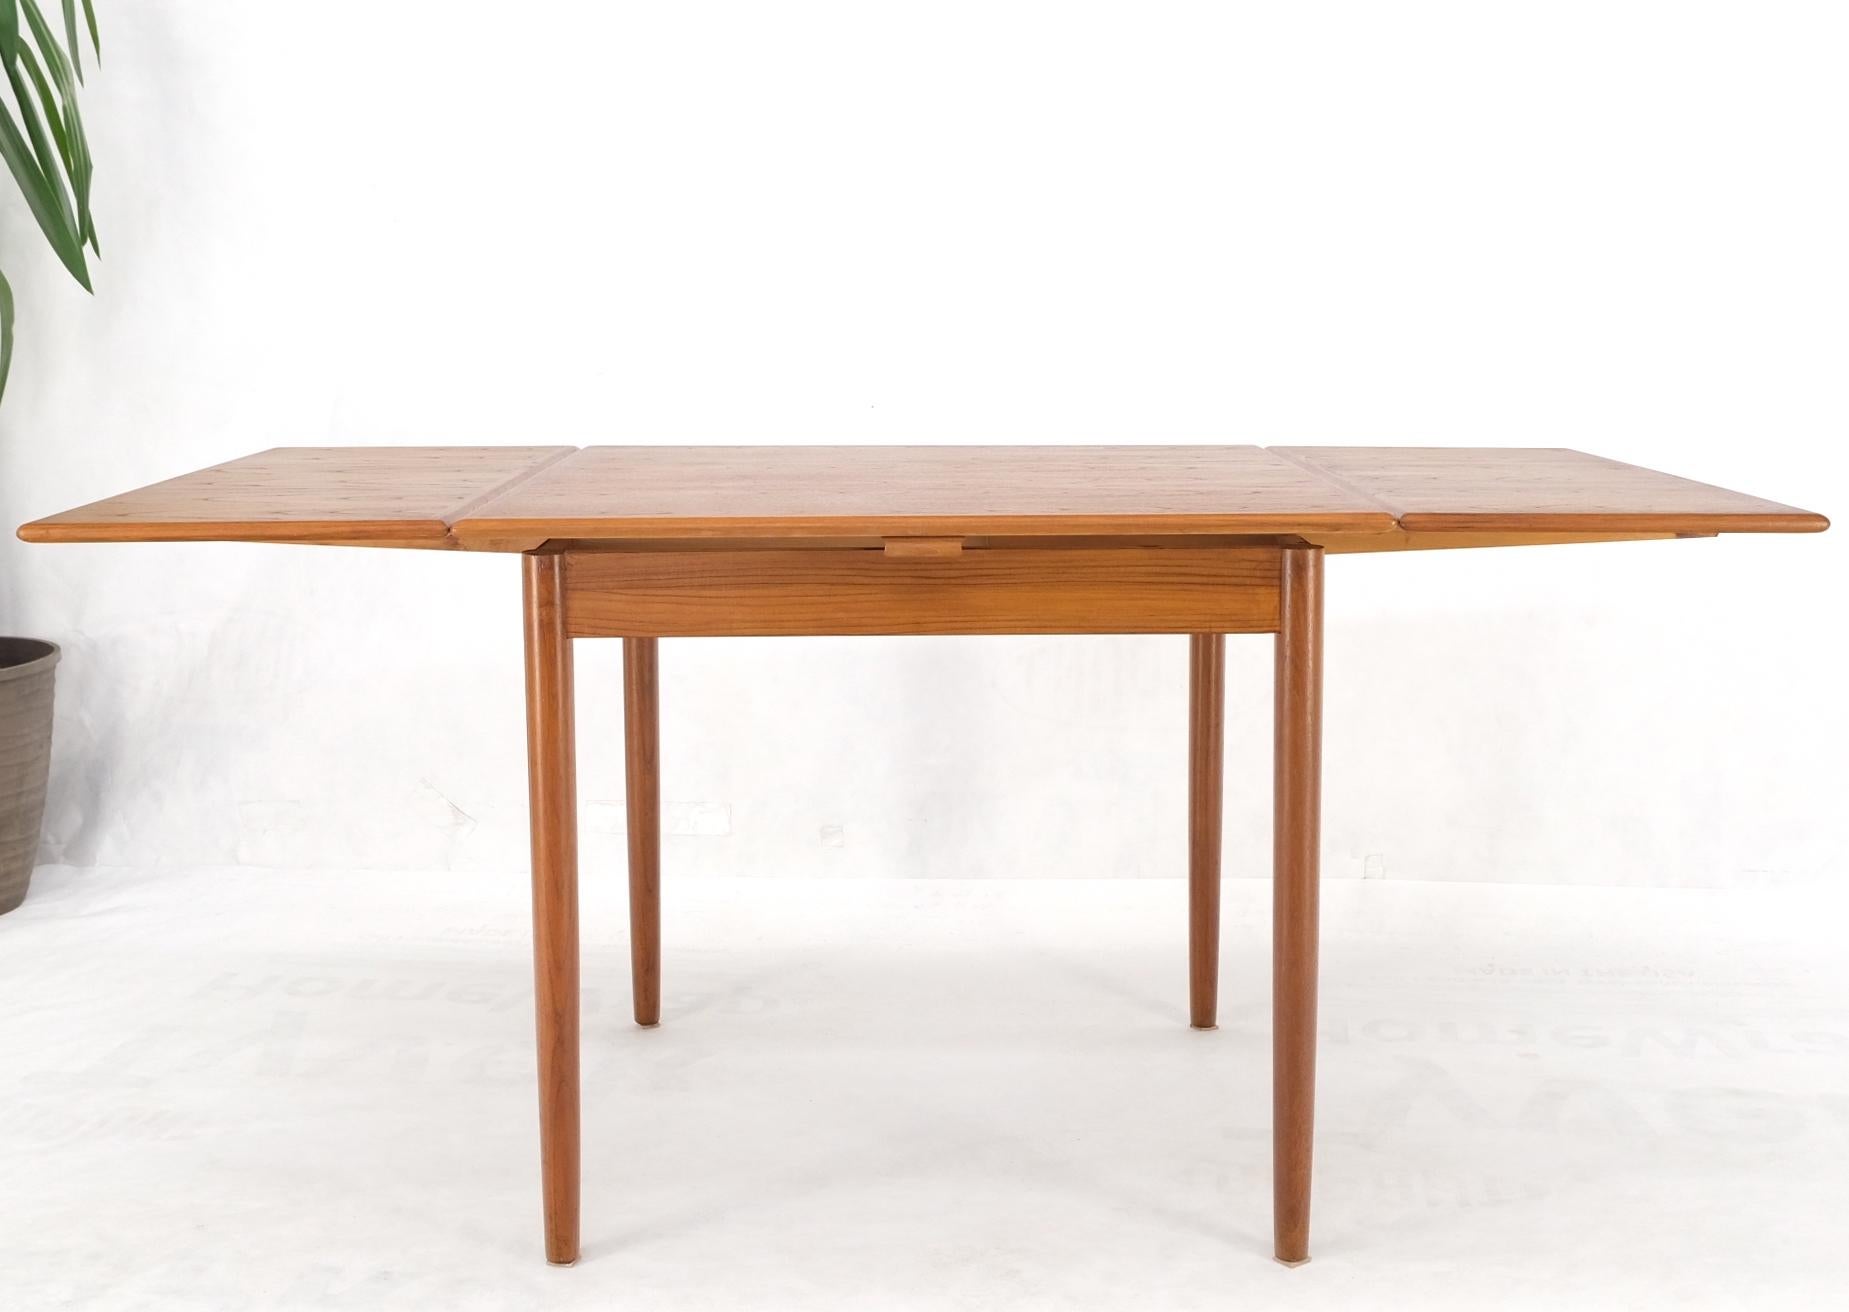 Lacquered Danish Mid-Century Modern Square Teak Refectory Extension Boards Dining Table For Sale